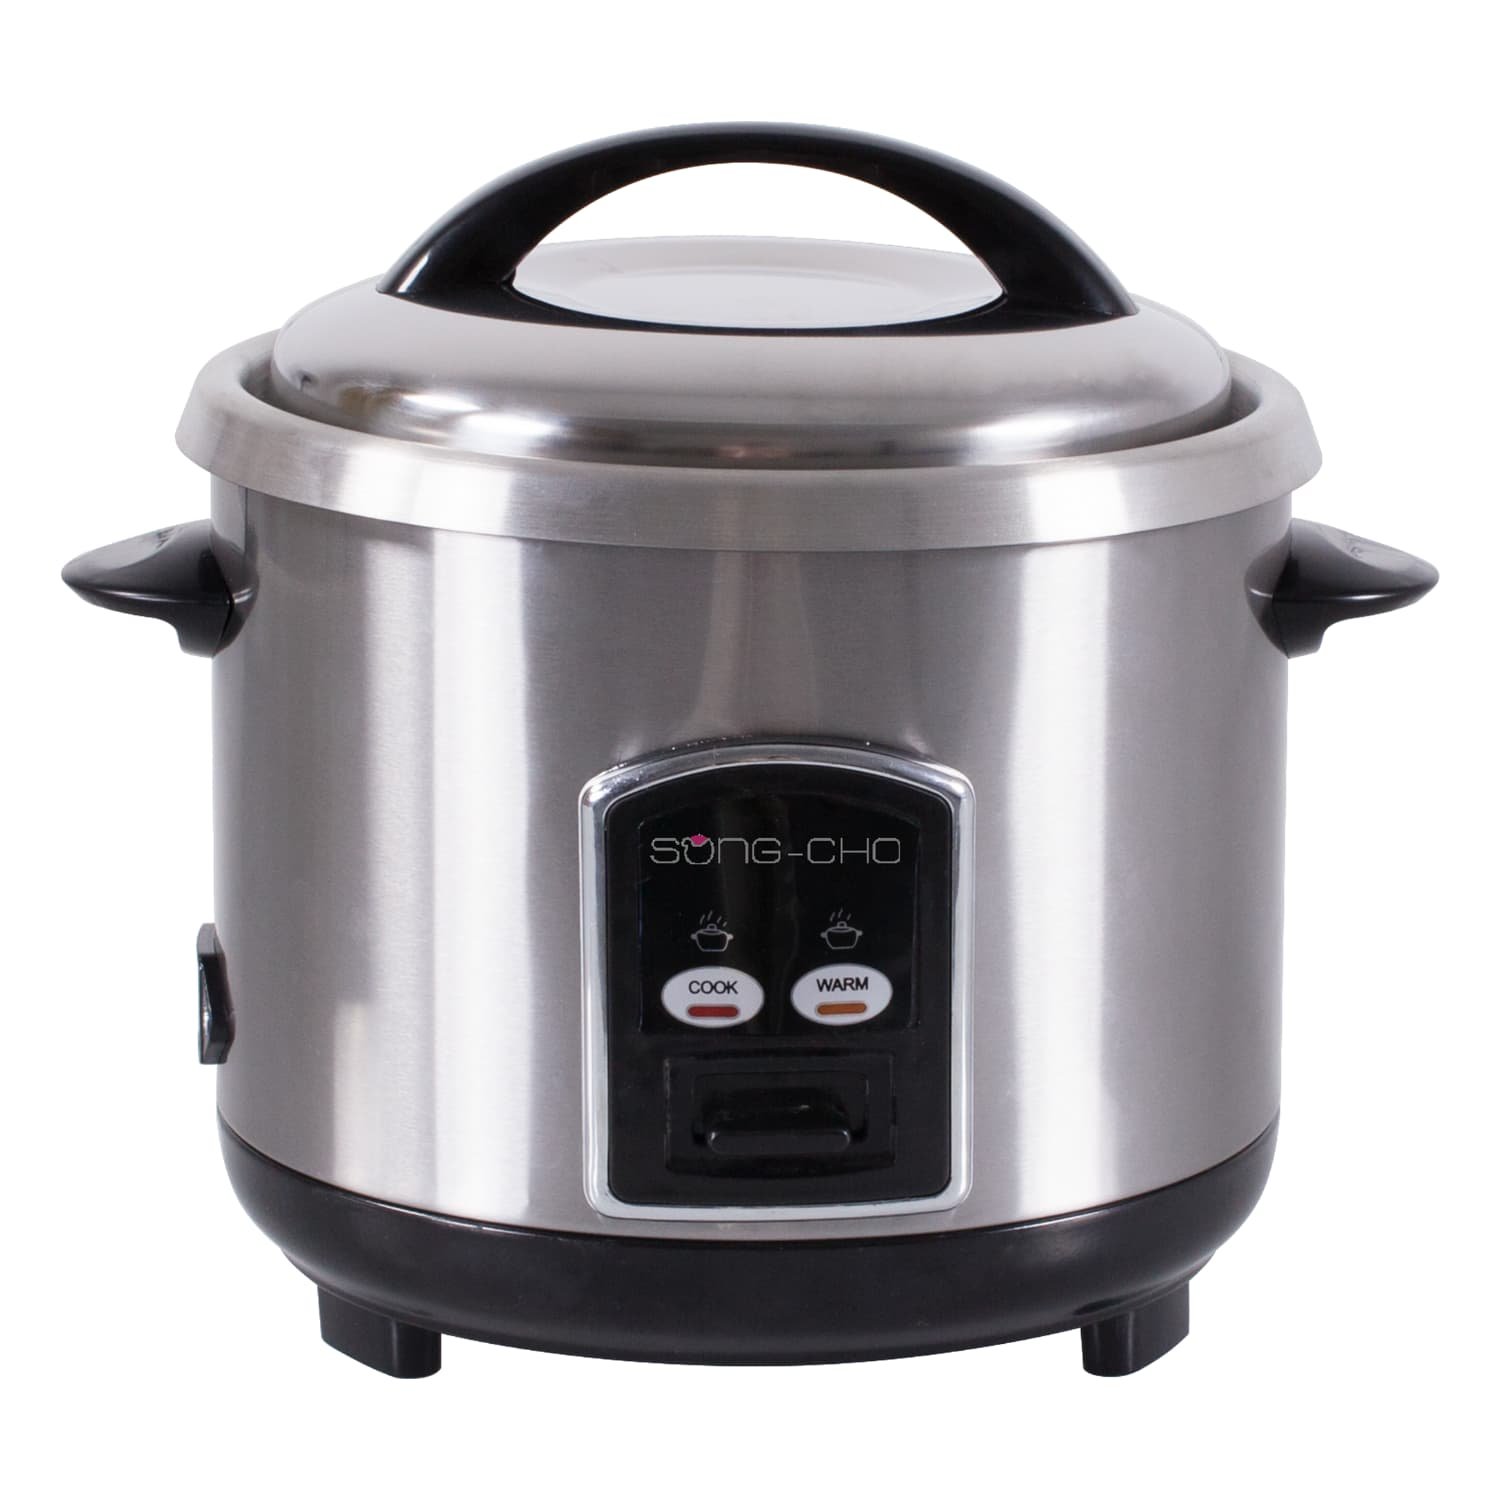 10 Best Rice Cookers in Singapore That you Should Buy From 99 (2020)